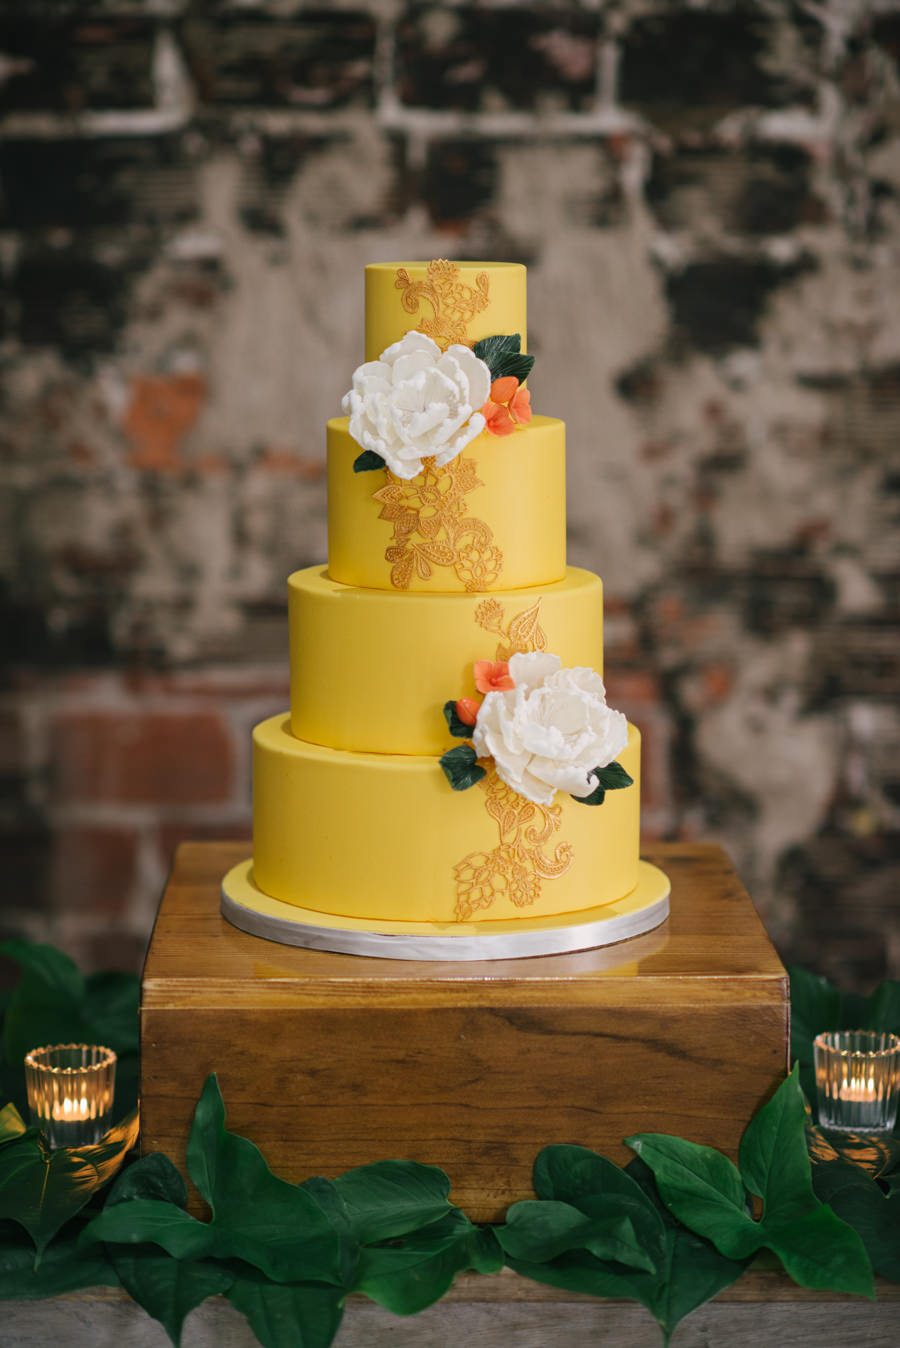 Caribbean Inspired, 4- Tiered Round Wedding Cake on Wooden Table with Yellow Fondant and Gold Design Detailing Accented with White Flowers